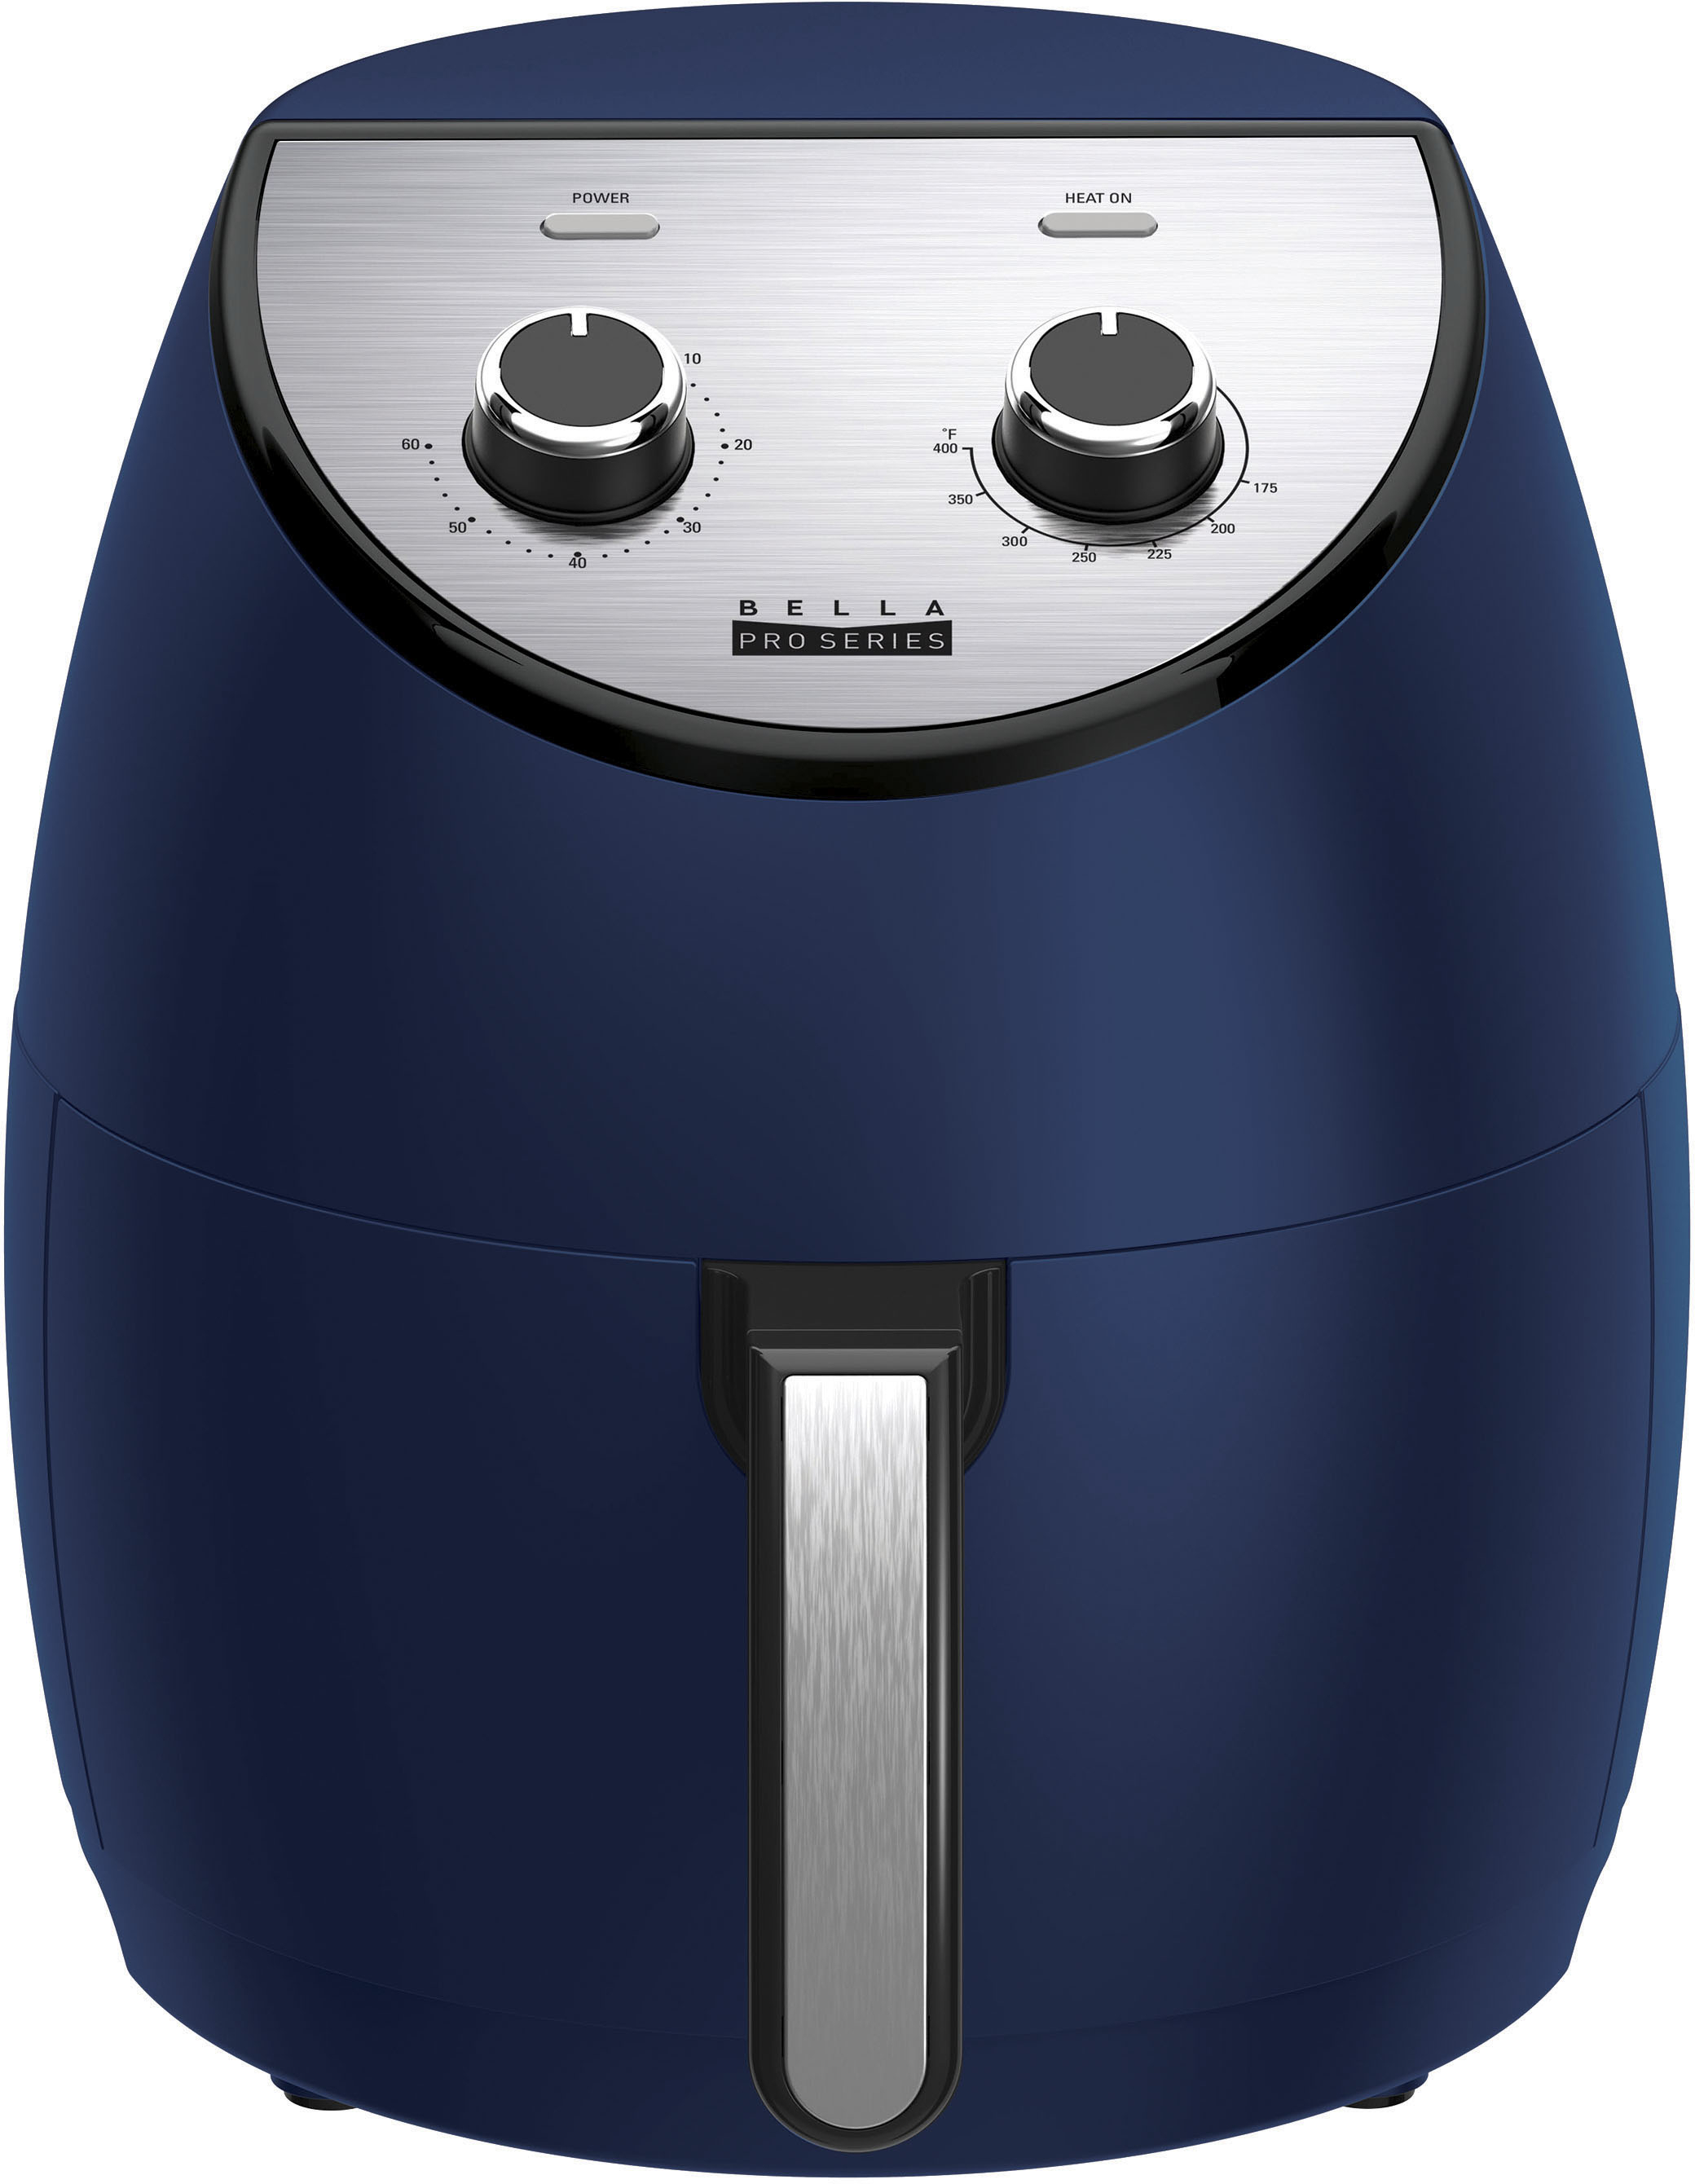 Angle View: Bella Pro Series - 4.2-qt. Analog Air Fryer with Matte Finish - Matte Ink Blue